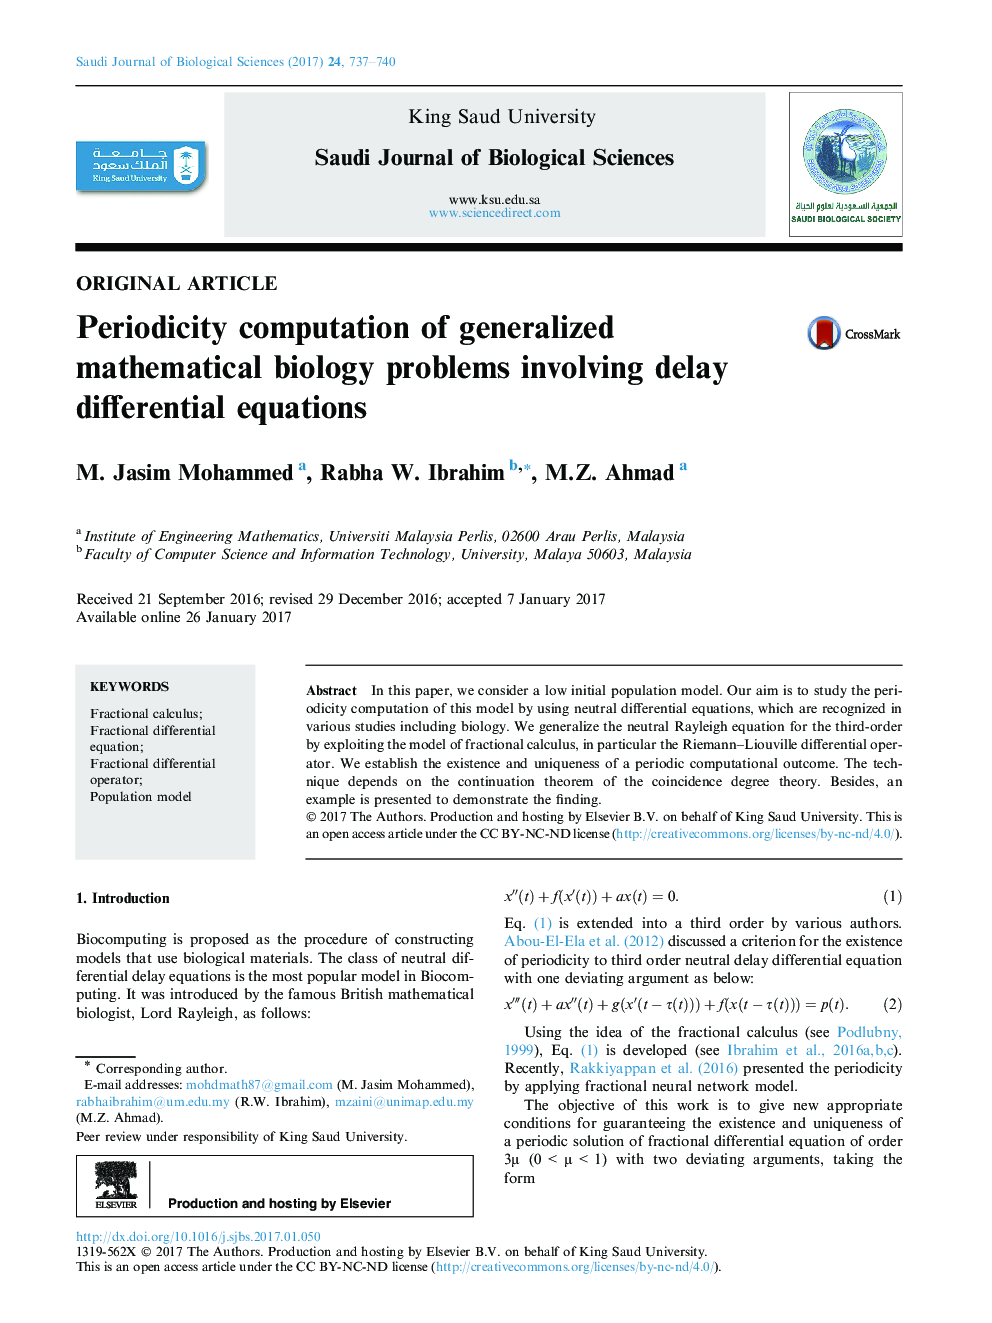 Original articlePeriodicity computation of generalized mathematical biology problems involving delay differential equations